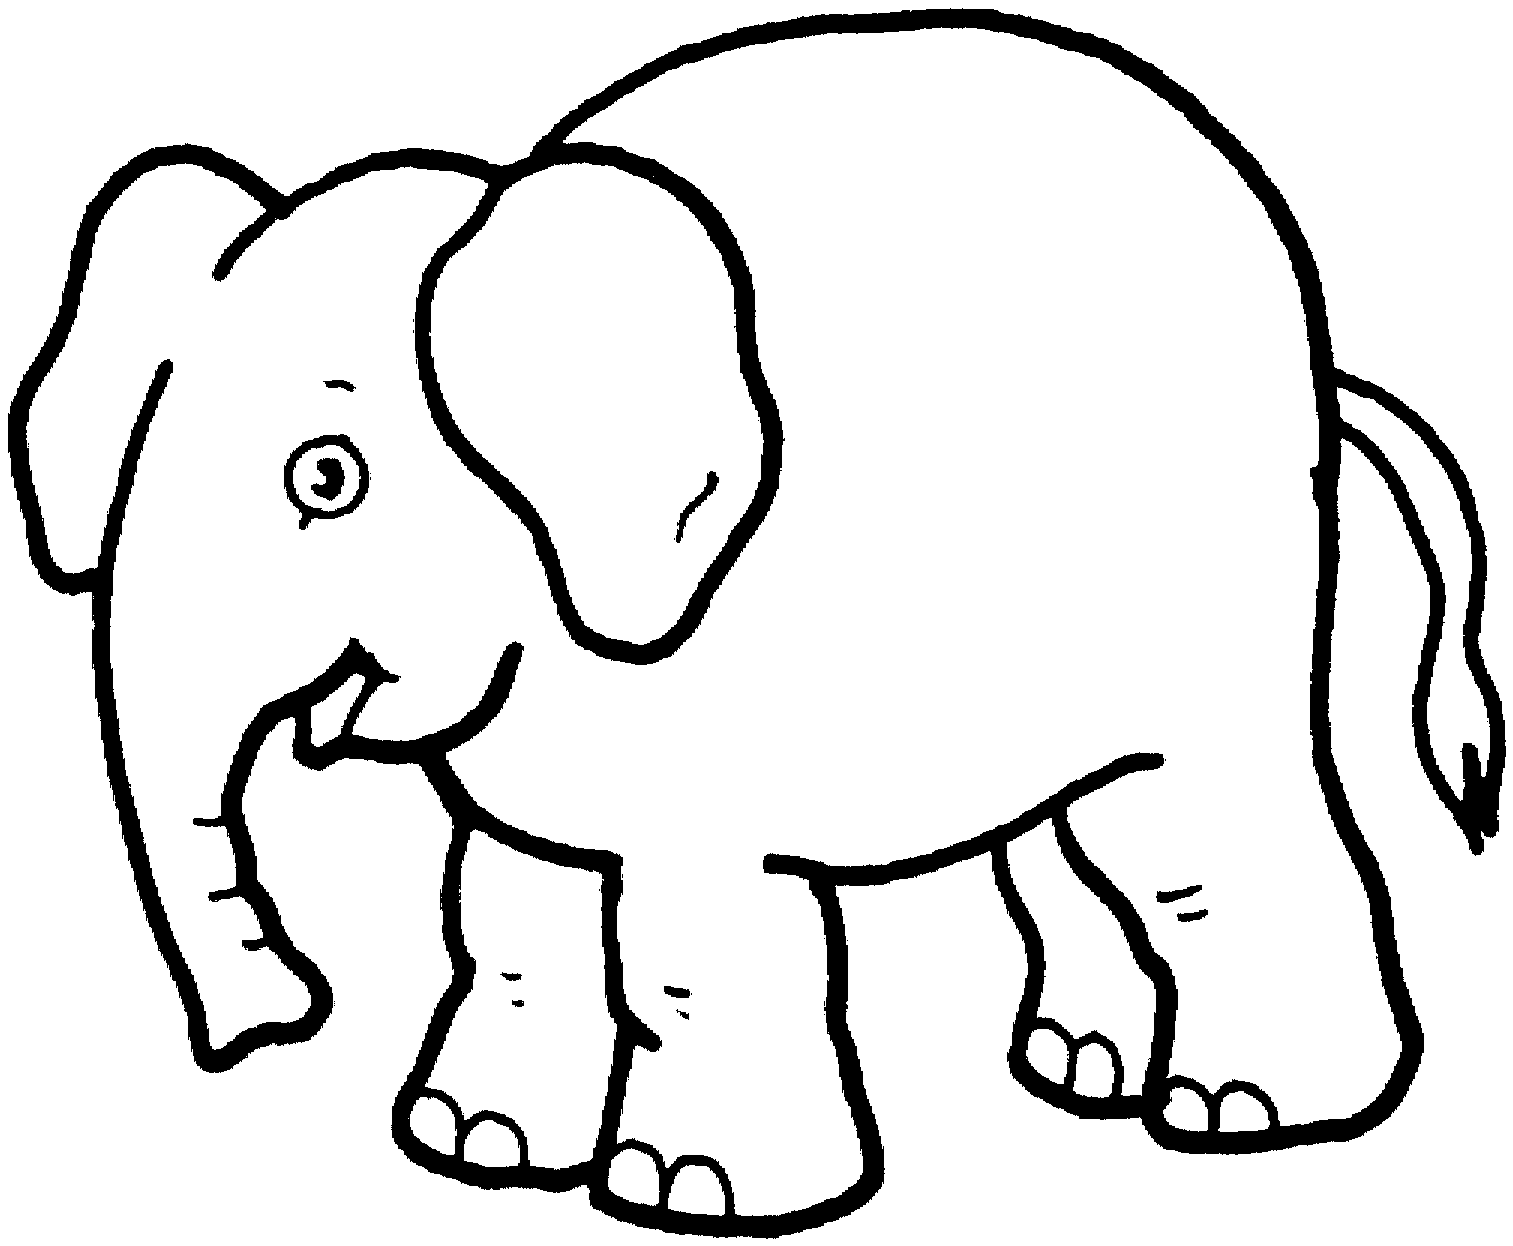 elephants to color | Coloring Picture HD For Kids | 670 